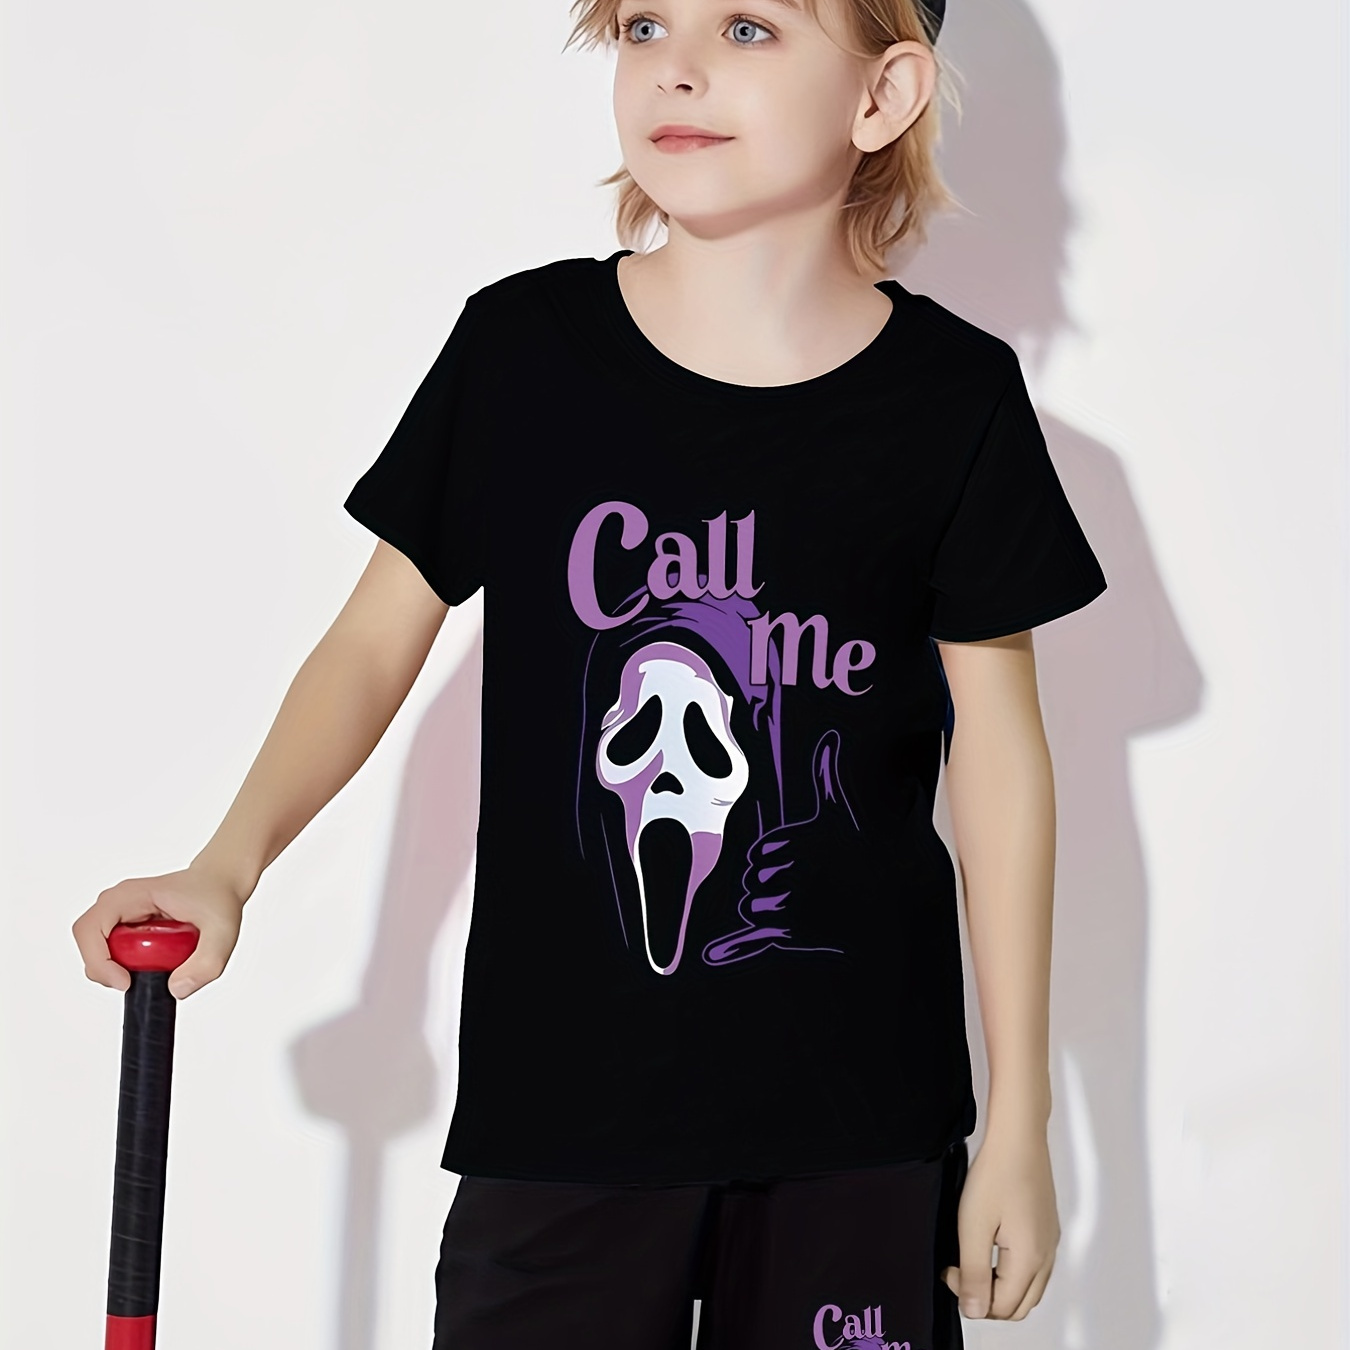 Halloween Funny Smiling Face Print T-shirts For Boys - Cool, Lightweight  And Comfy Summer Clothes! - Temu